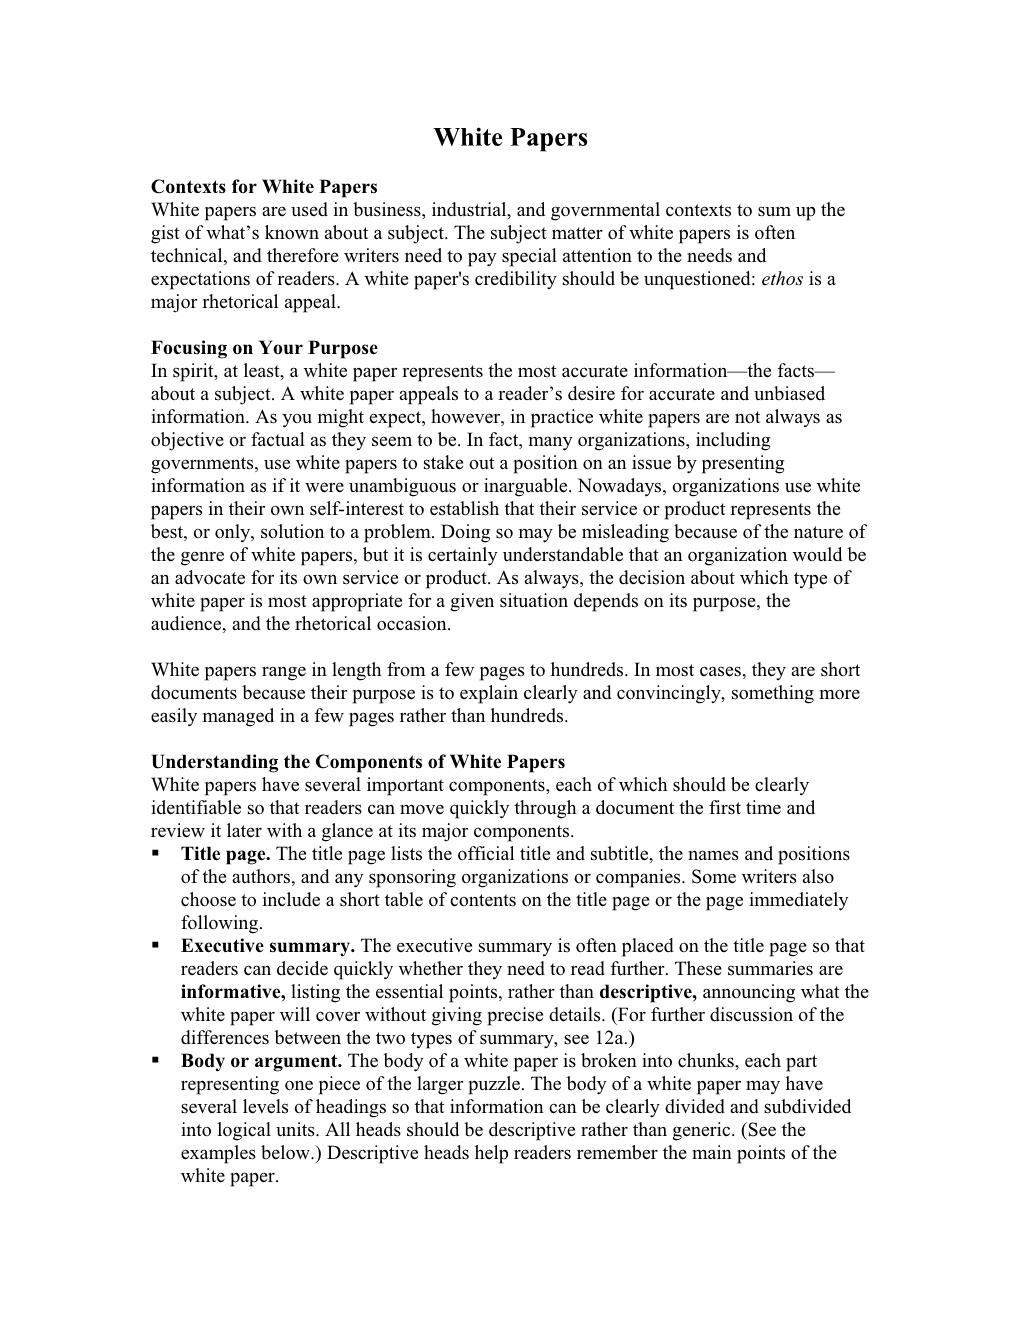 Contexts for White Papers